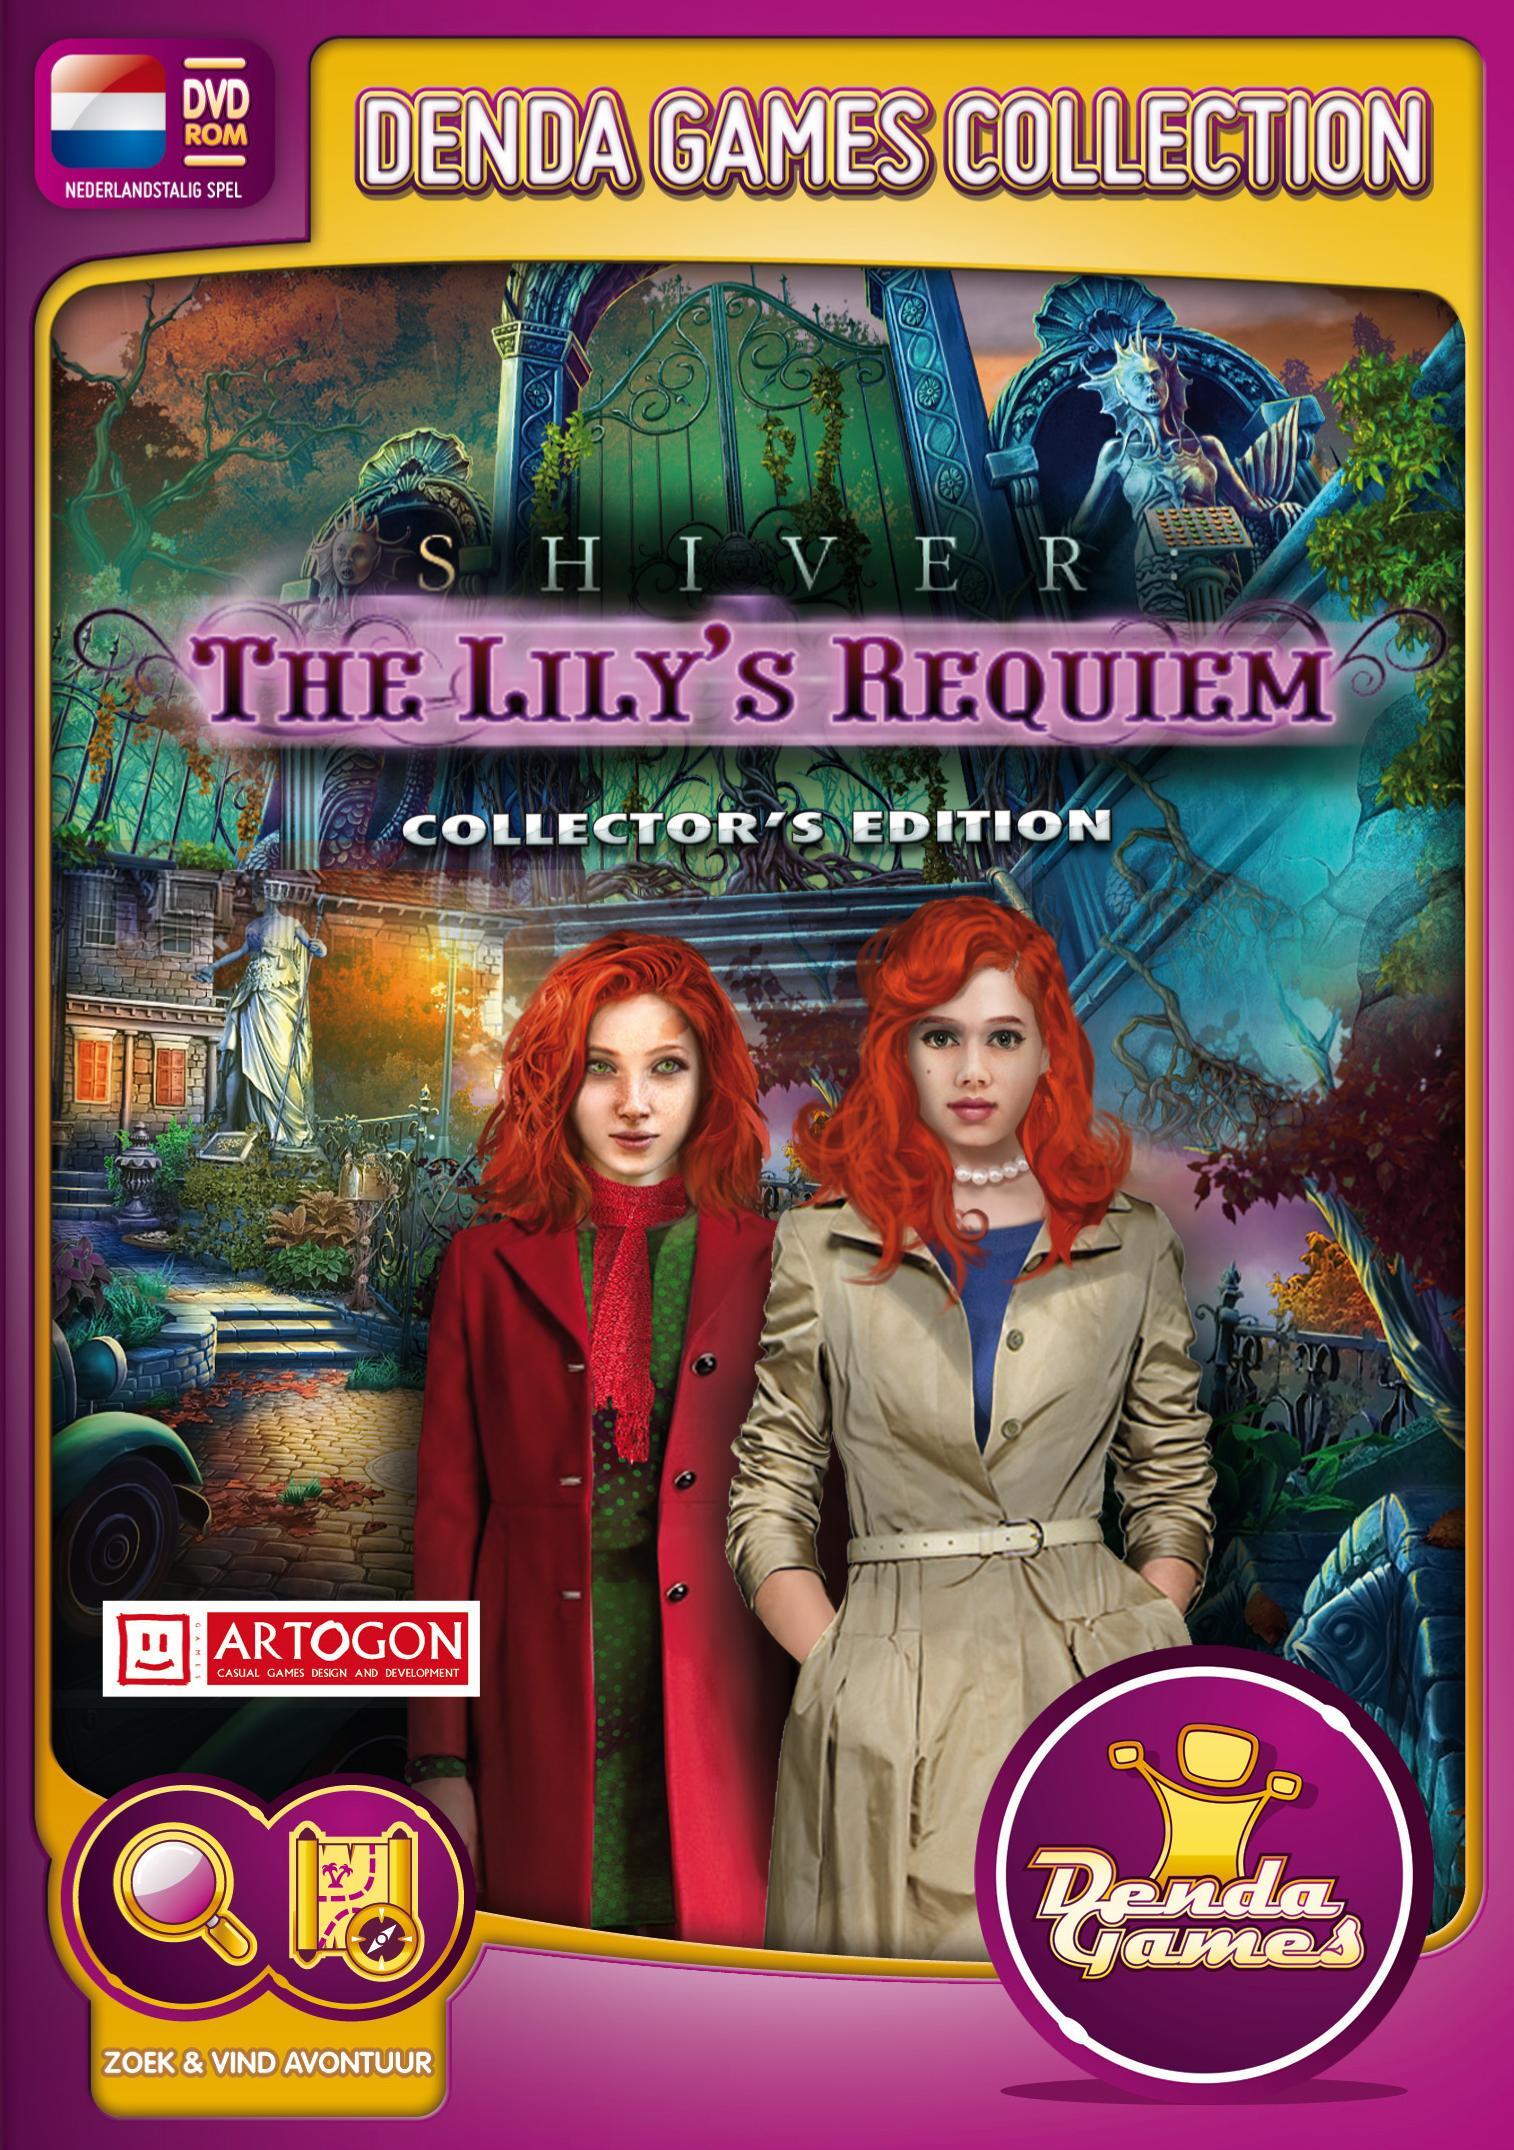 Denda publishers B.V. Shiver: The Lily's Requiem Collector's Edition - PC